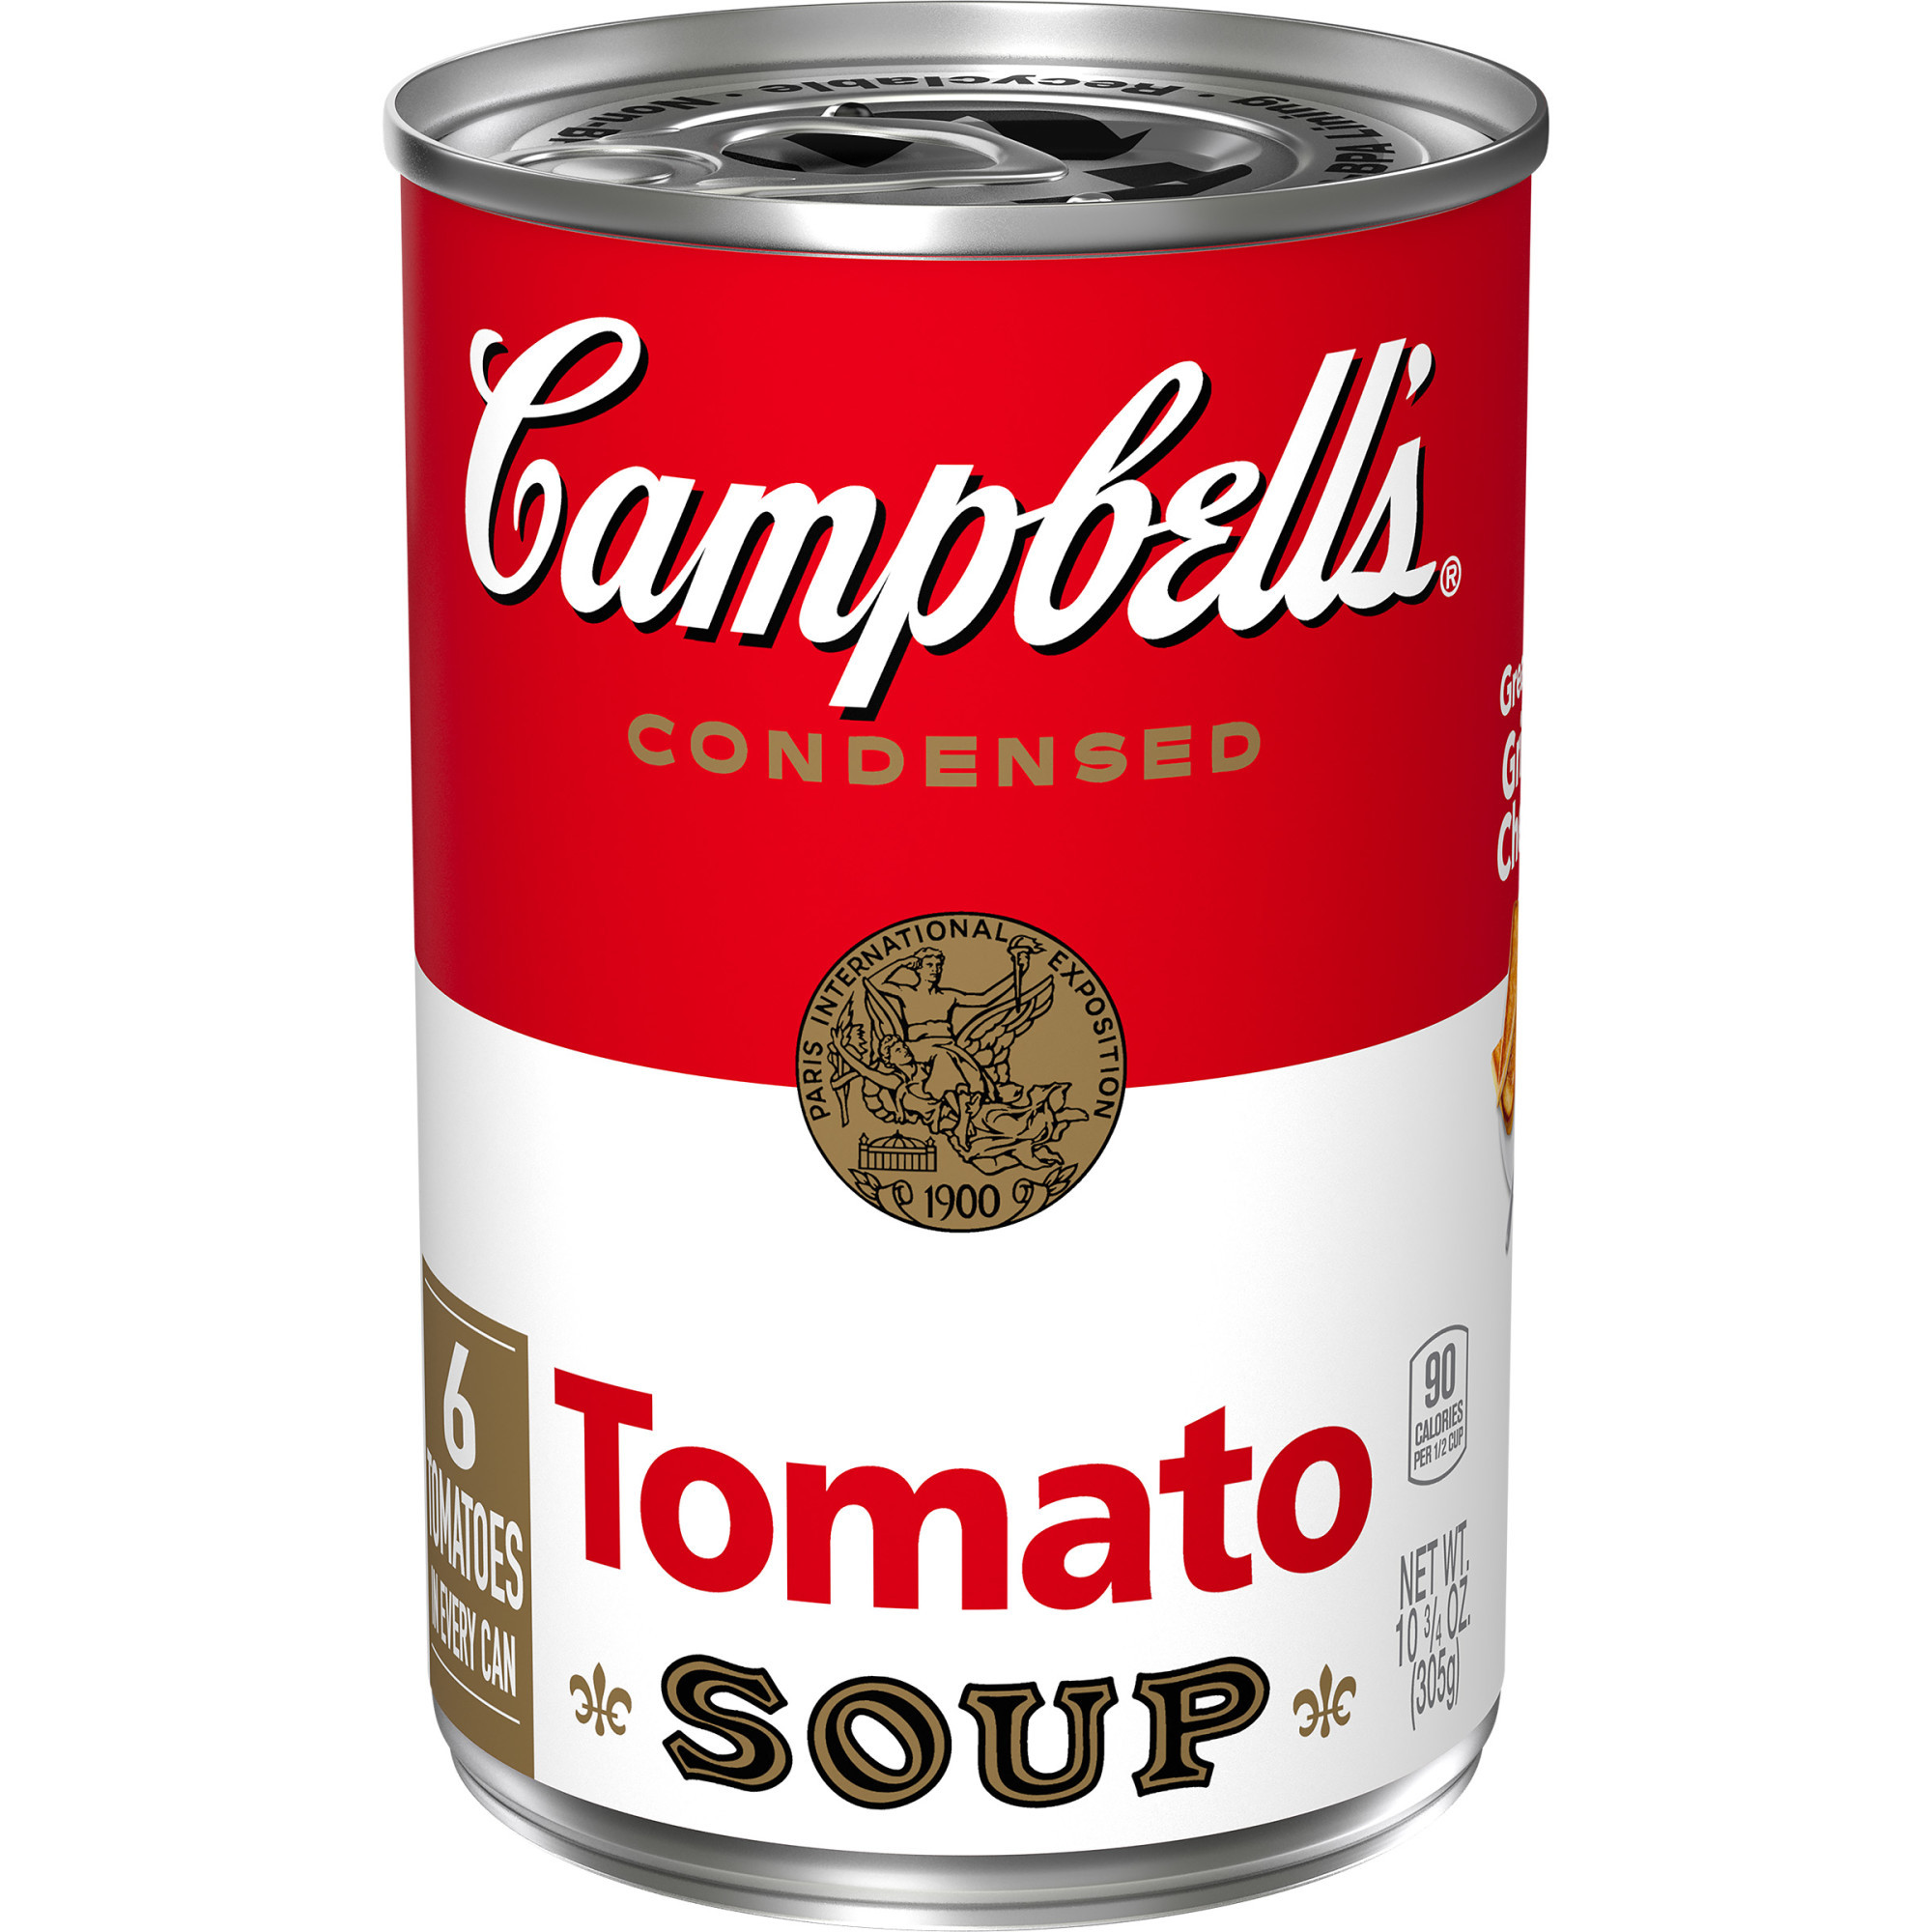 Tomato soup Can Awesome Campbell’s Condensed tomato soup 10 75 Ounce Can